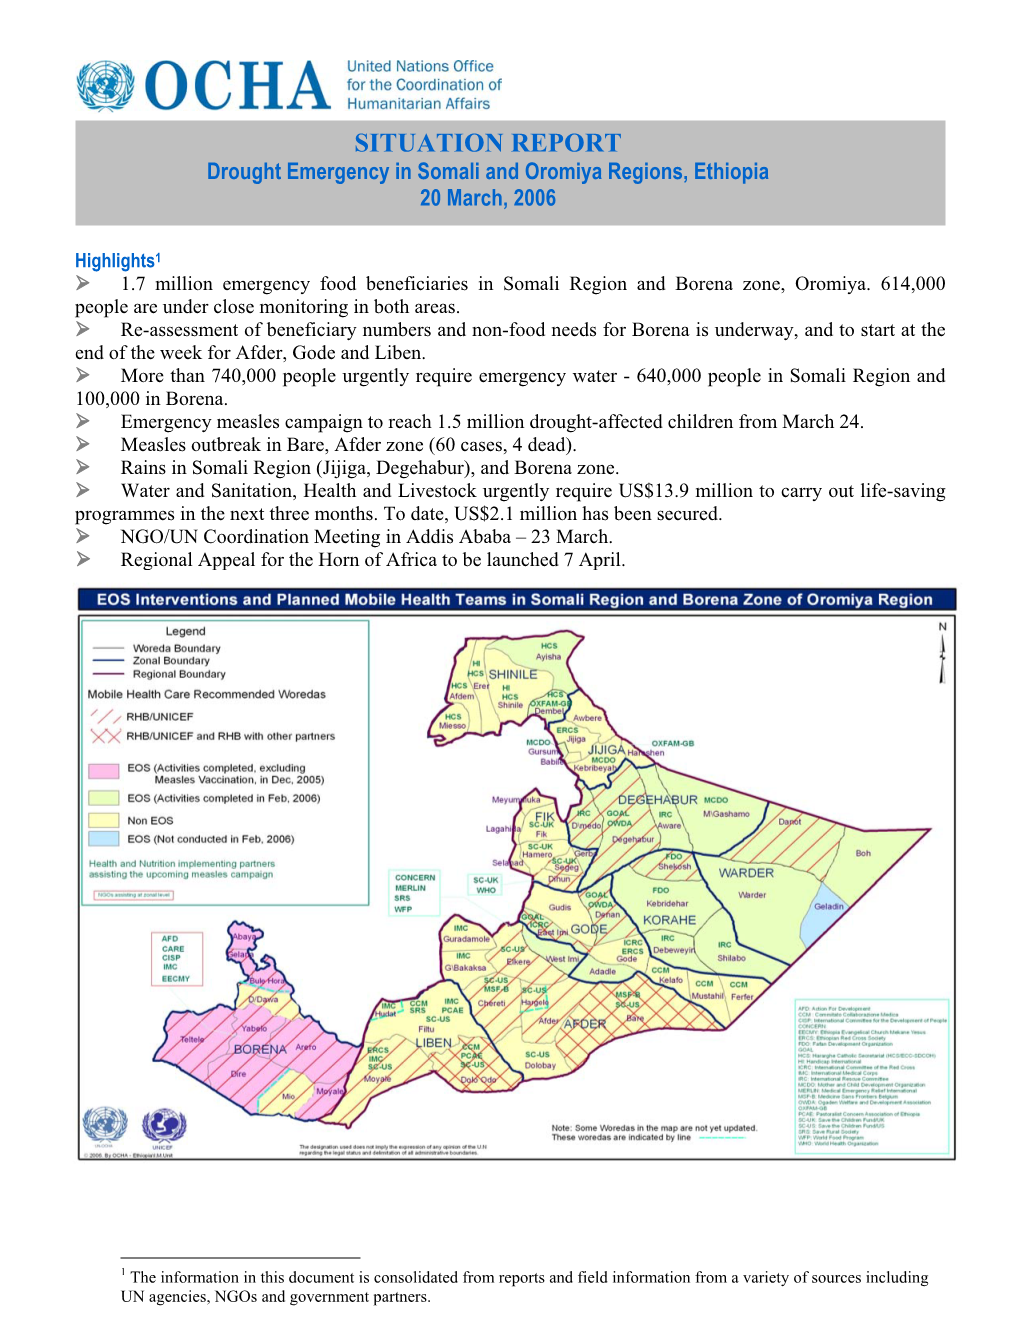 SITUATION REPORT Drought Emergency in Somali and Oromiya Regions, Ethiopia 20 March, 2006